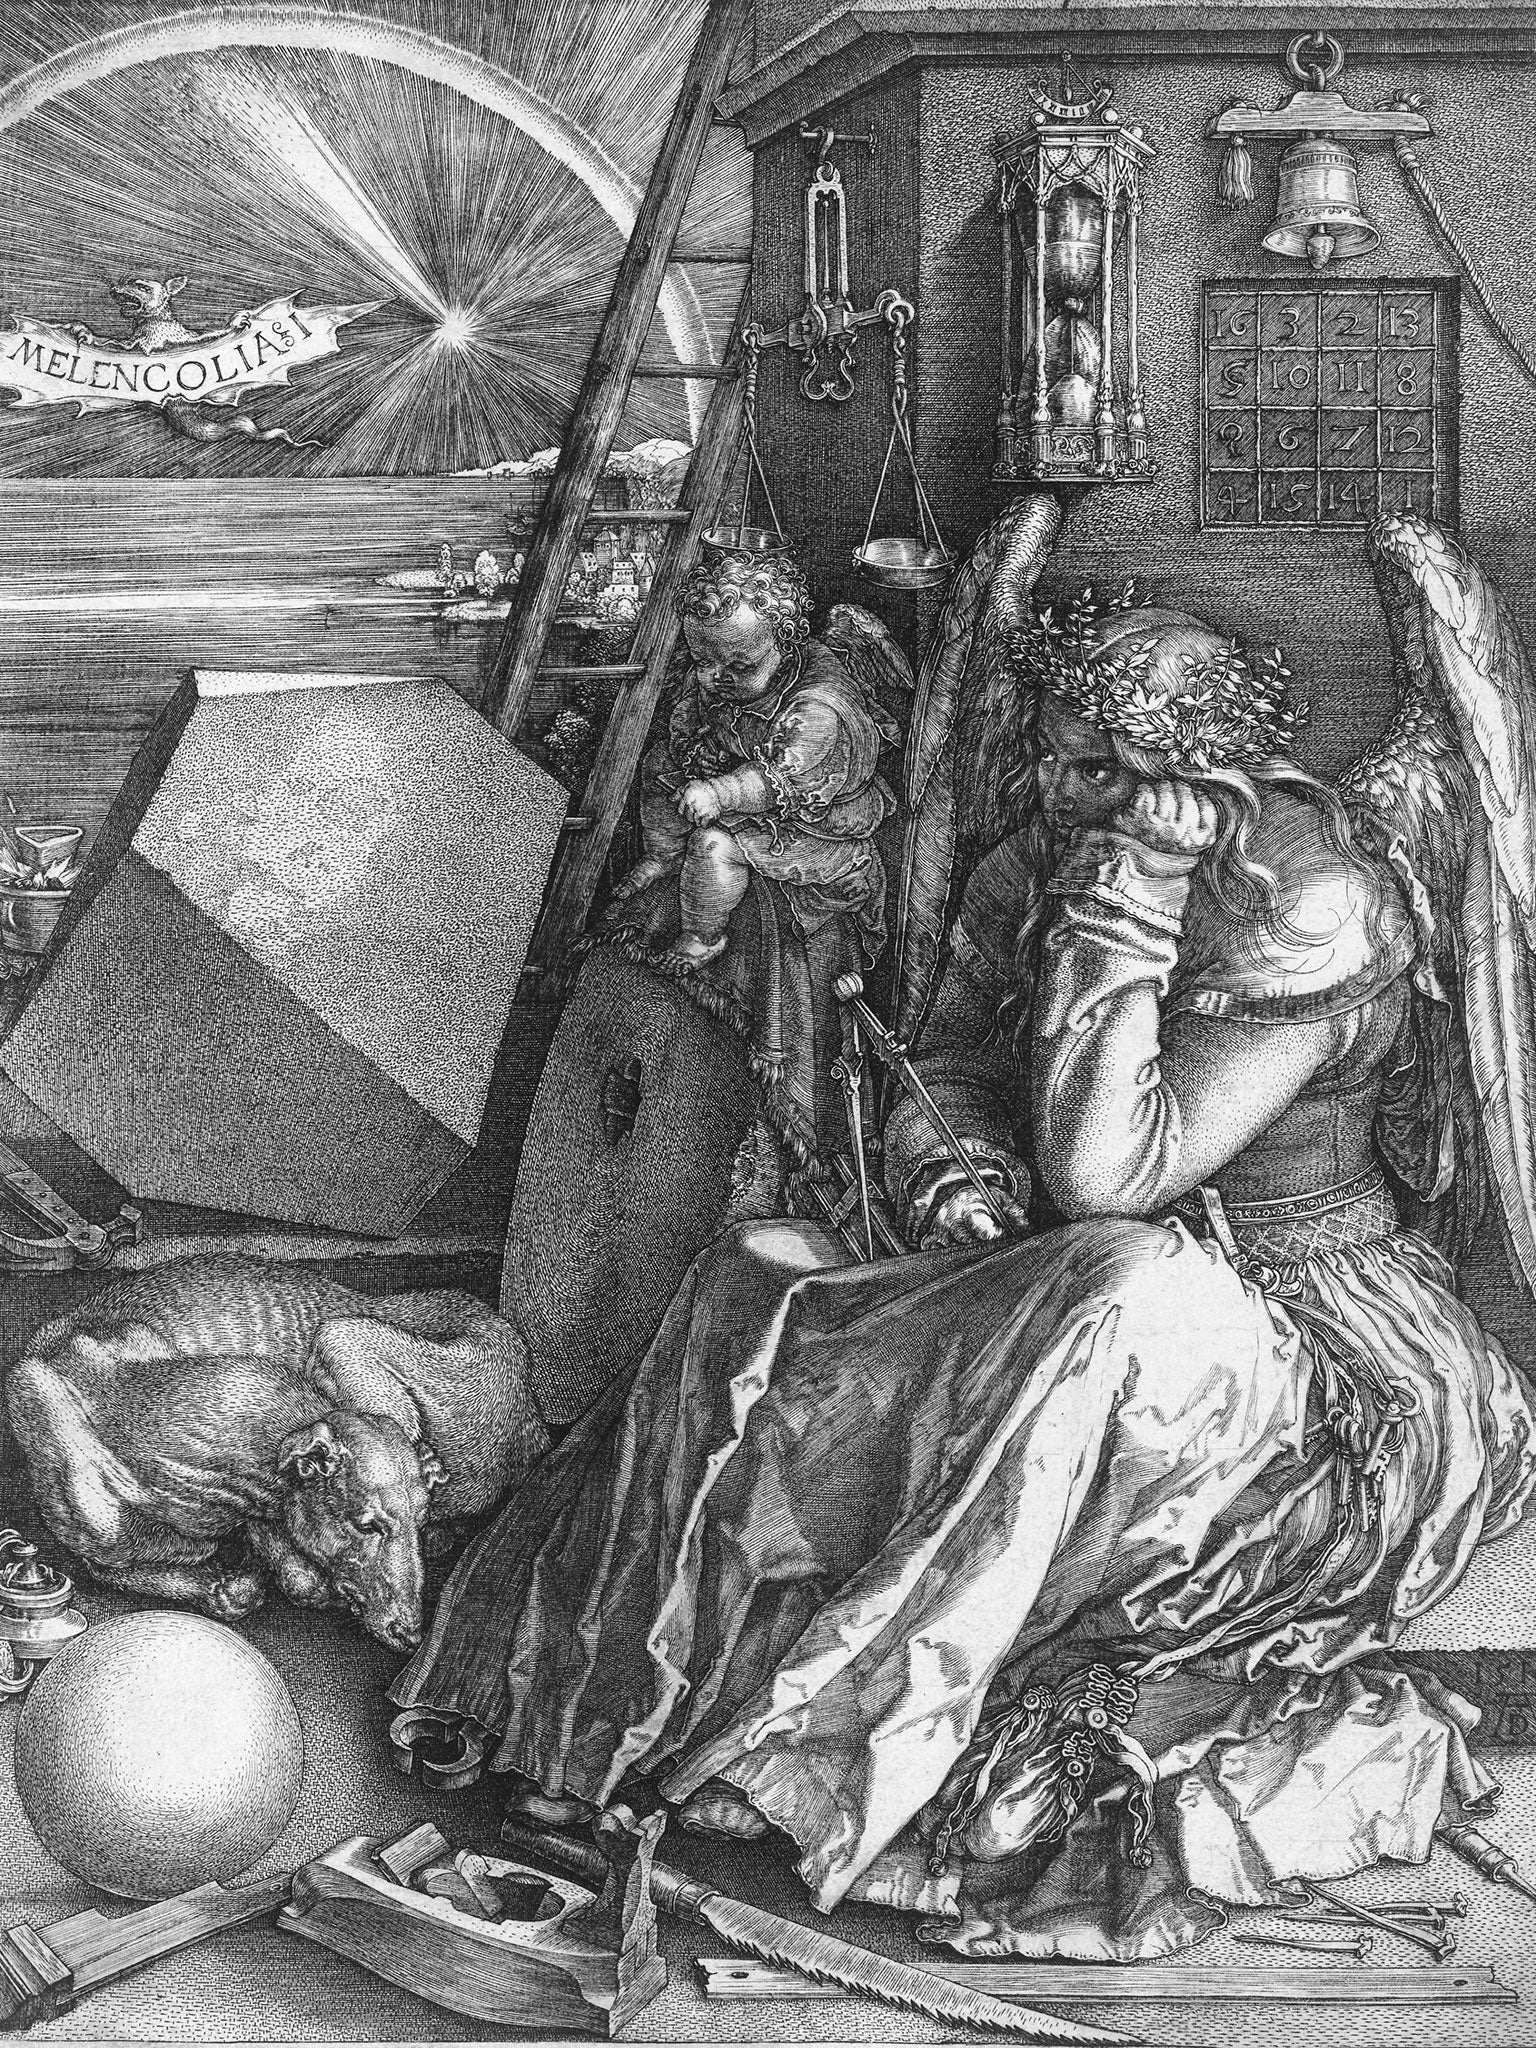 Melencolia I, the engraving by the German Renaissance master Albrecht Dürer that the Poly-Math record got it's title from